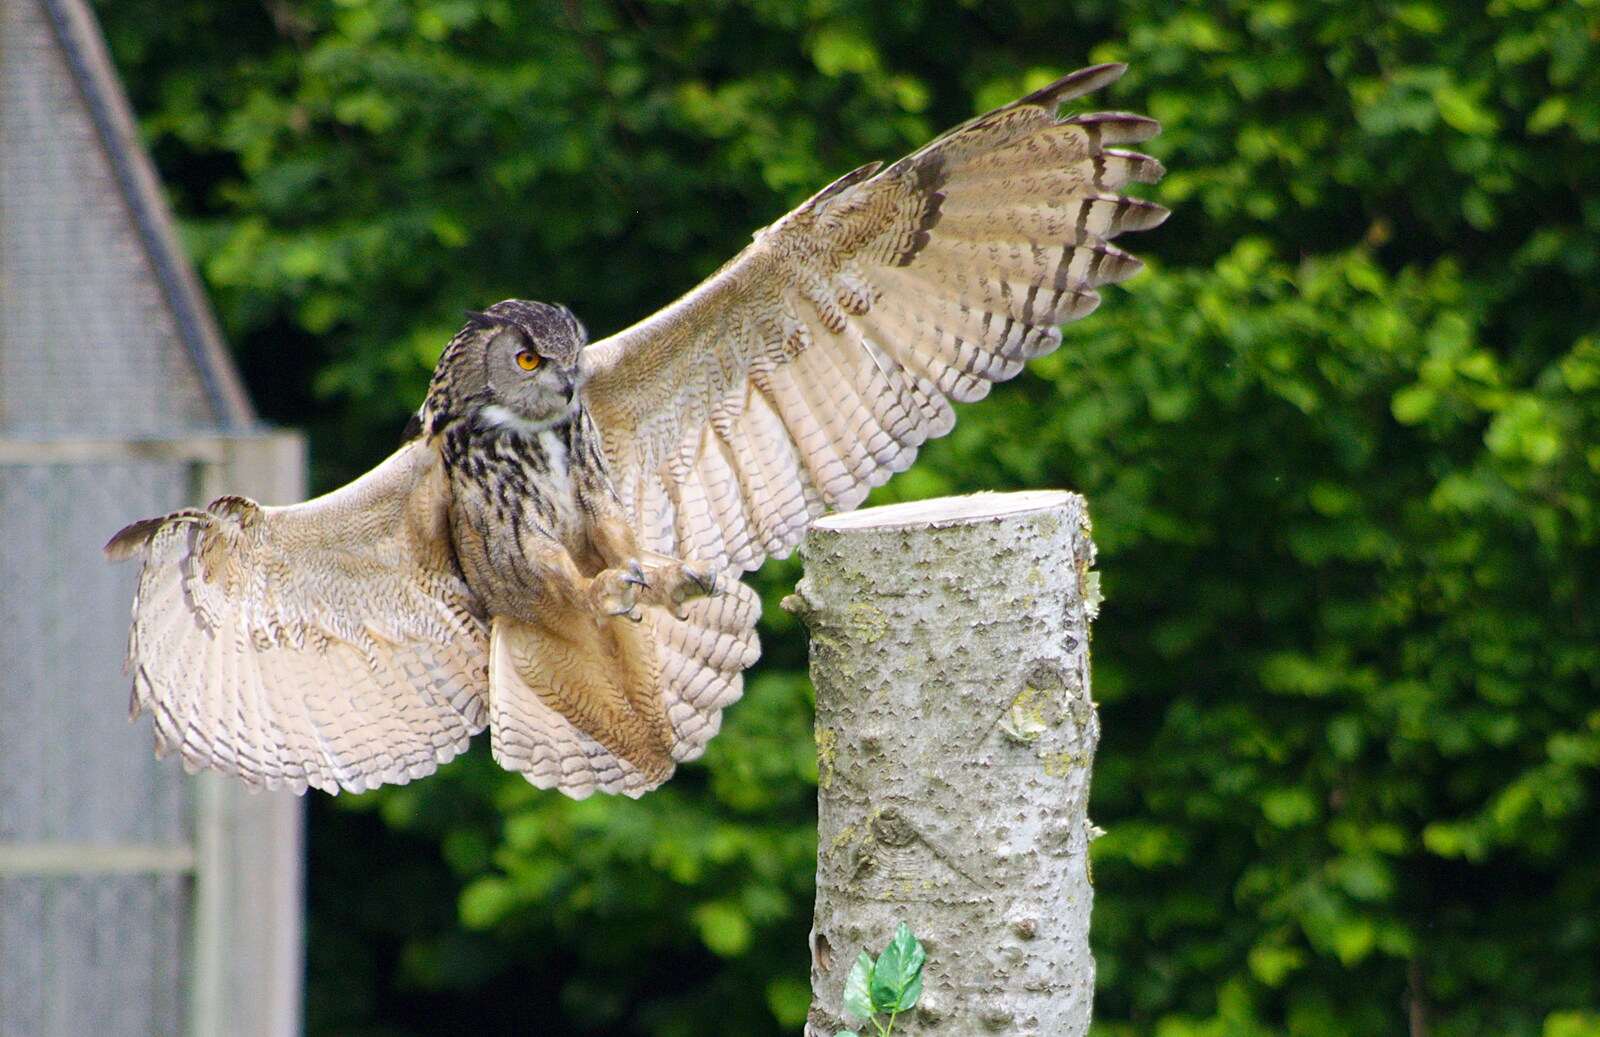 The Eagle Owl swoops in to land on its perch from A Birthday Trip to the Zoo, Banham, Norfolk - 26th May 2014